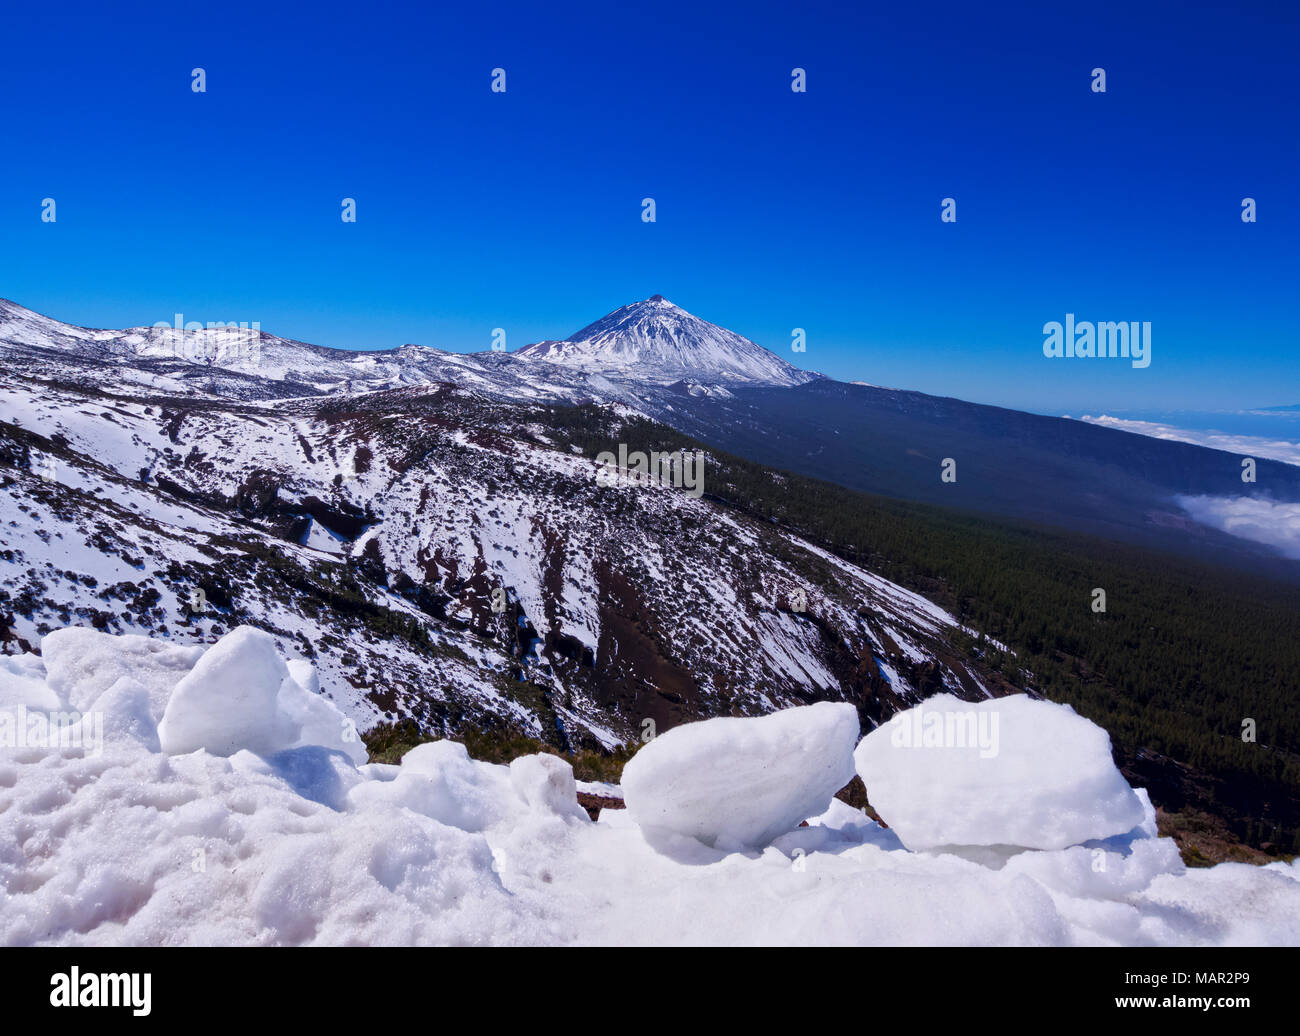 Teide National Park covered with snow, UNESCO World Heritage Site, Tenerife Island, Canary Islands, Spain, Europe Stock Photo